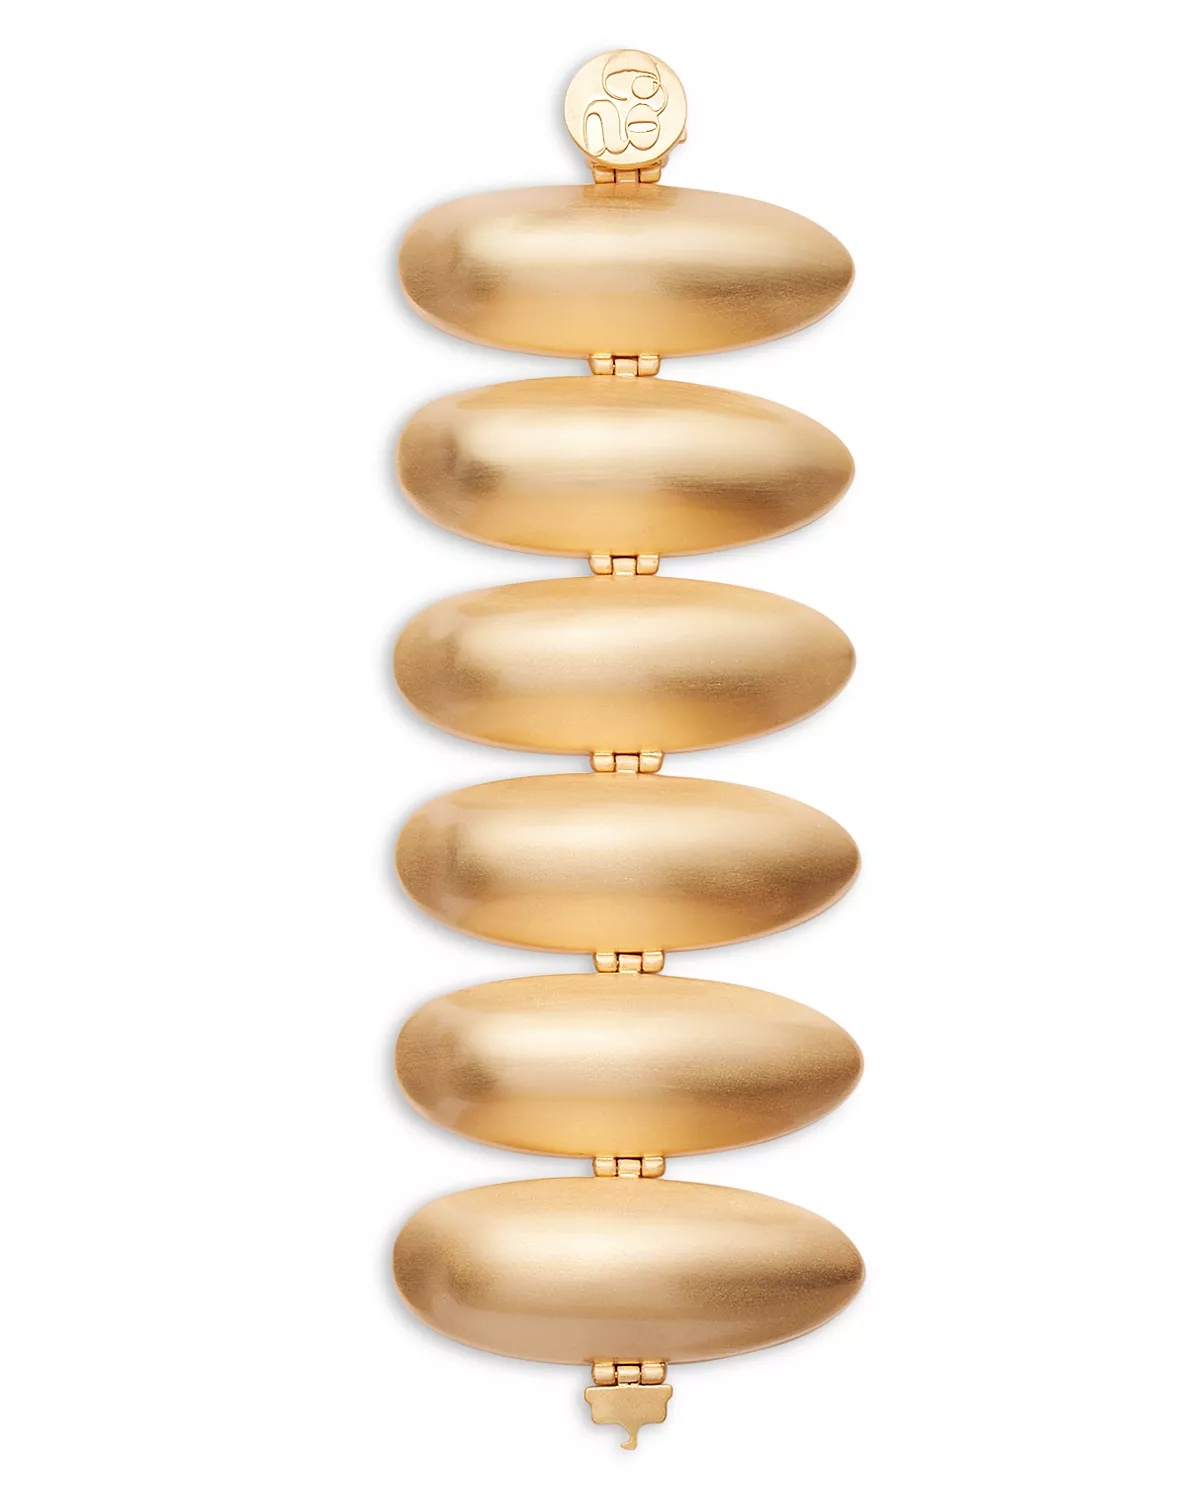 Fiore Elongated Oval Statement Bracelet in Gold Tone - 3